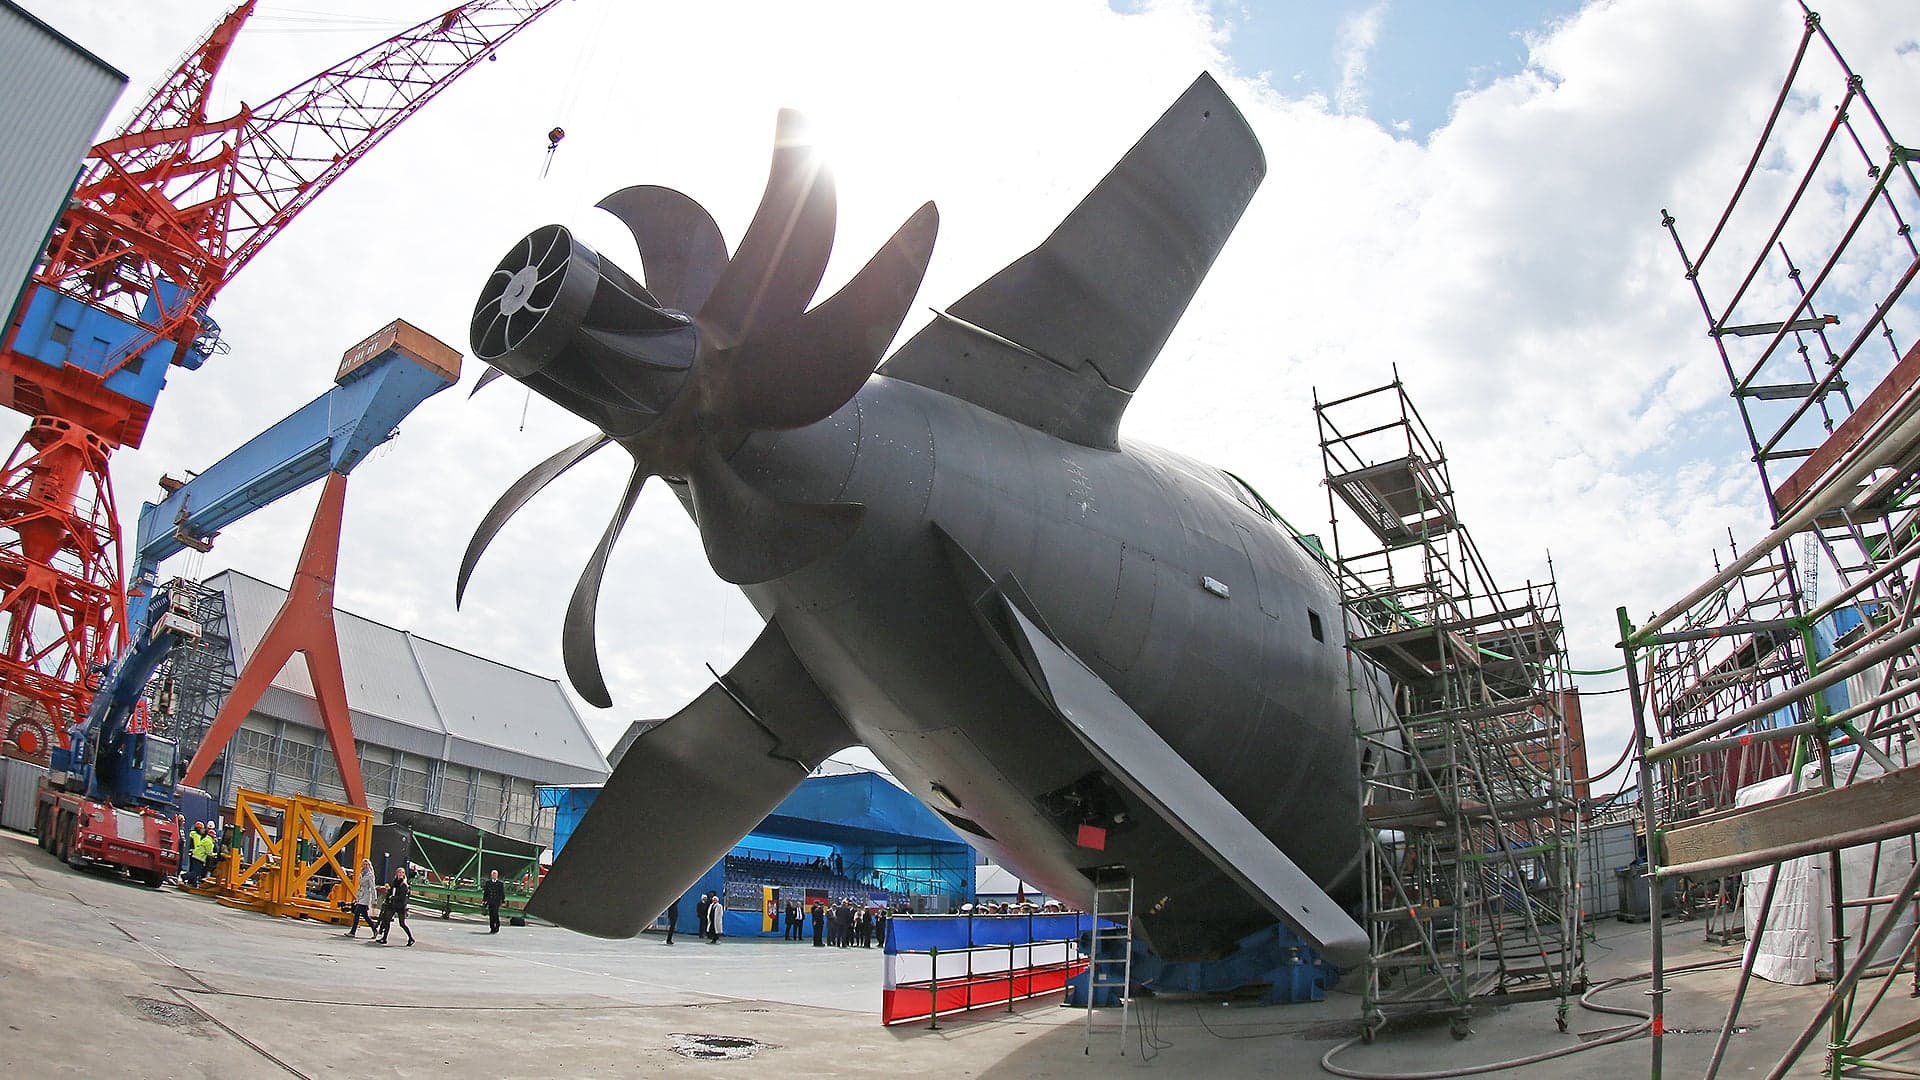 German Type 212 Sub Has This ‘Propeller Boss Vortex Diffuser’ To Reduce Its Acoustic Signature